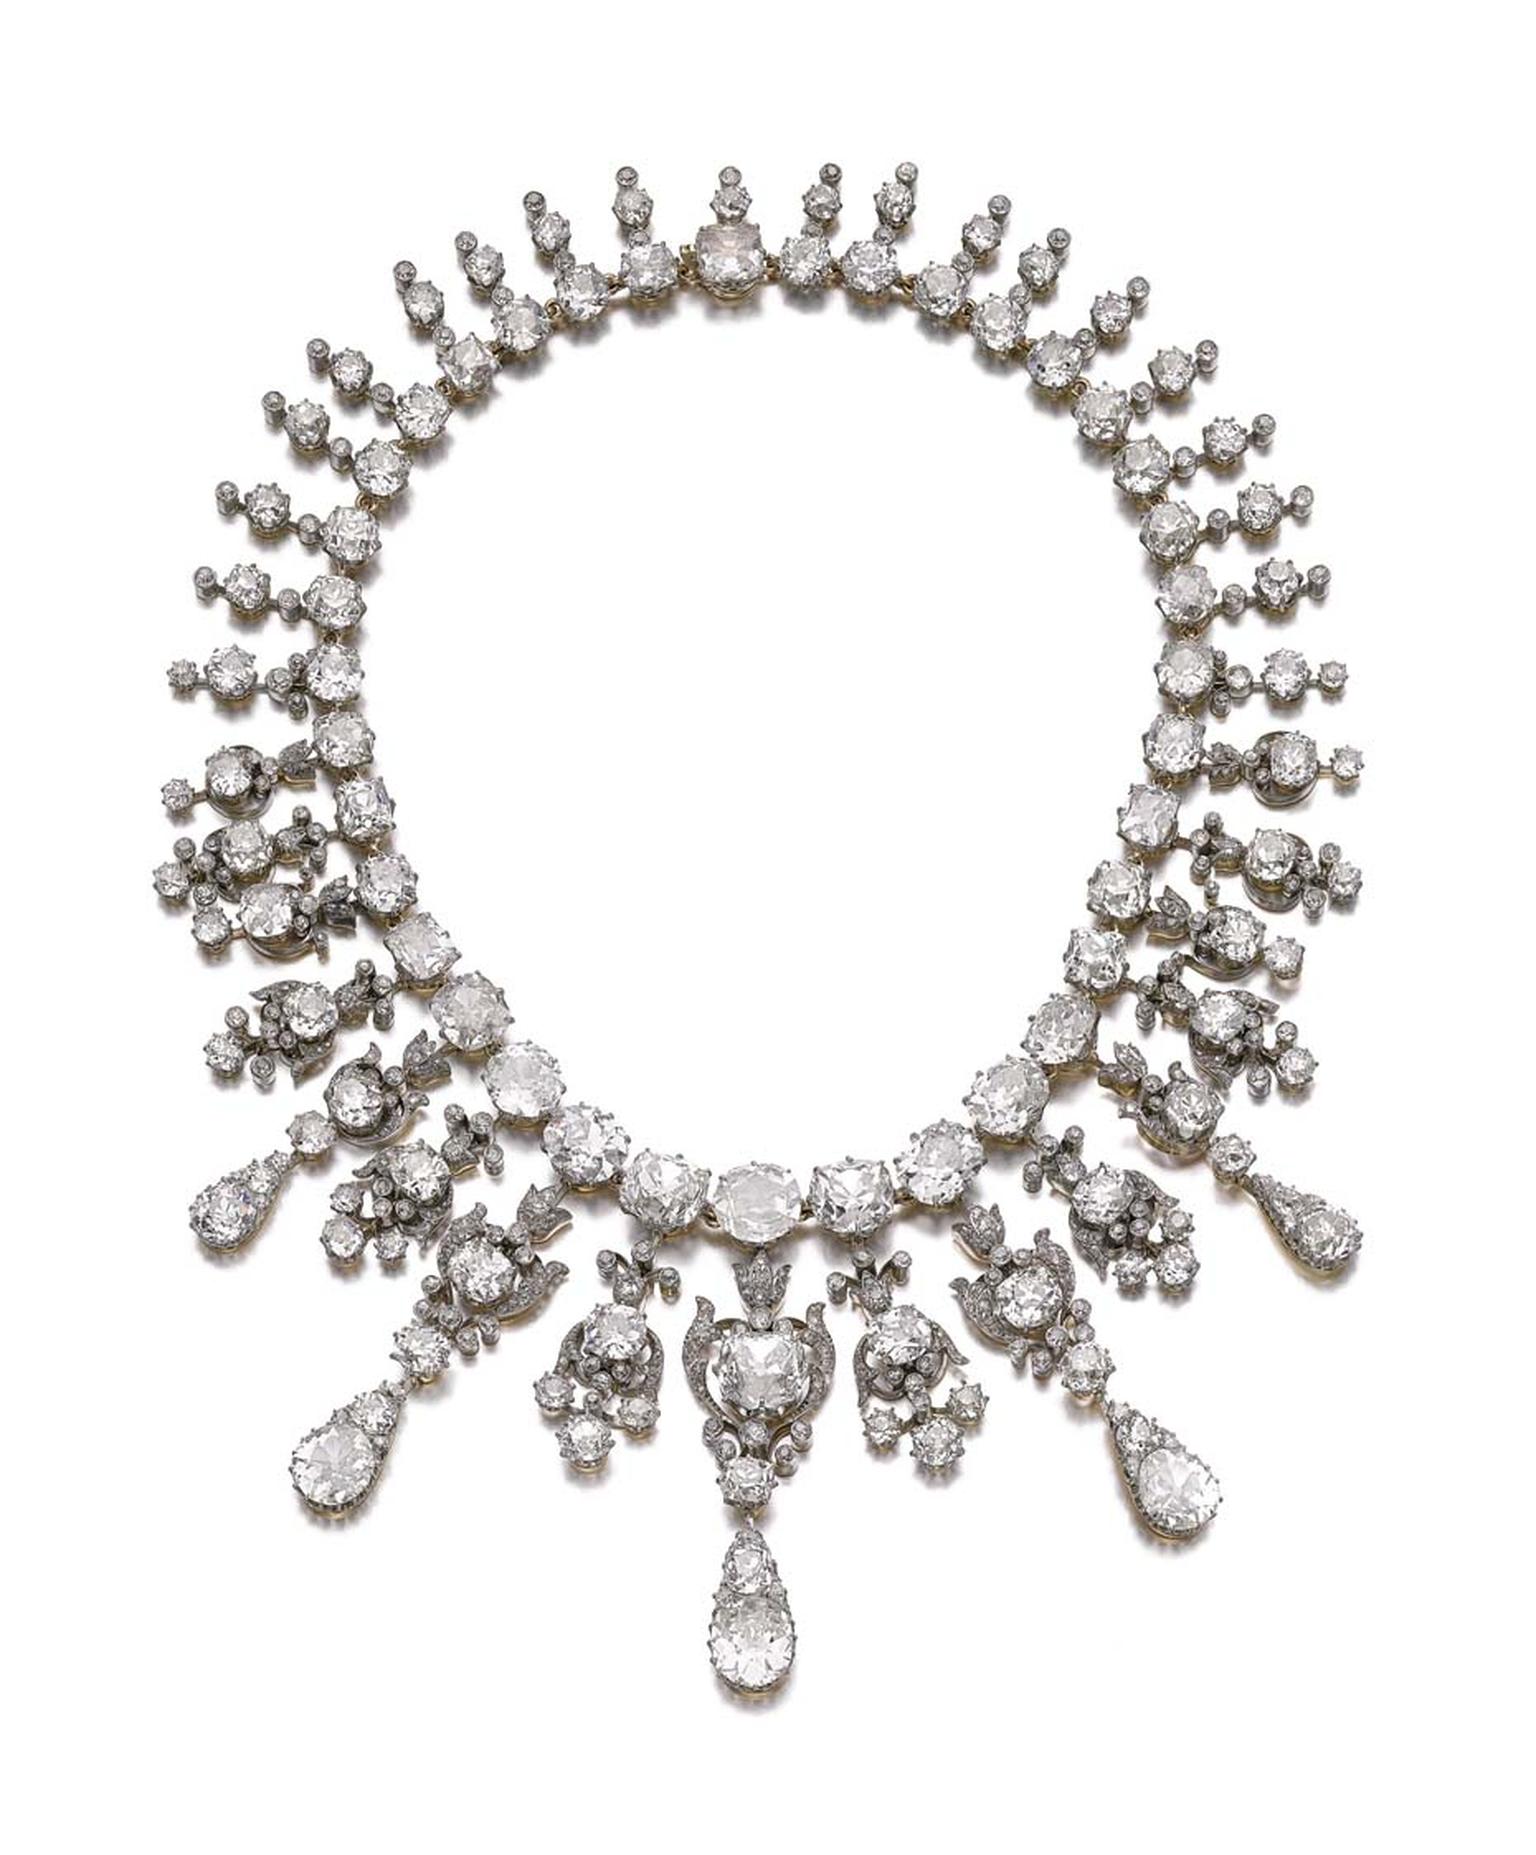 A diamond necklace from the collection of Flora Sassoon. Sold for CHF 1,085,000 (estimate: CHF 360,000-625,000)